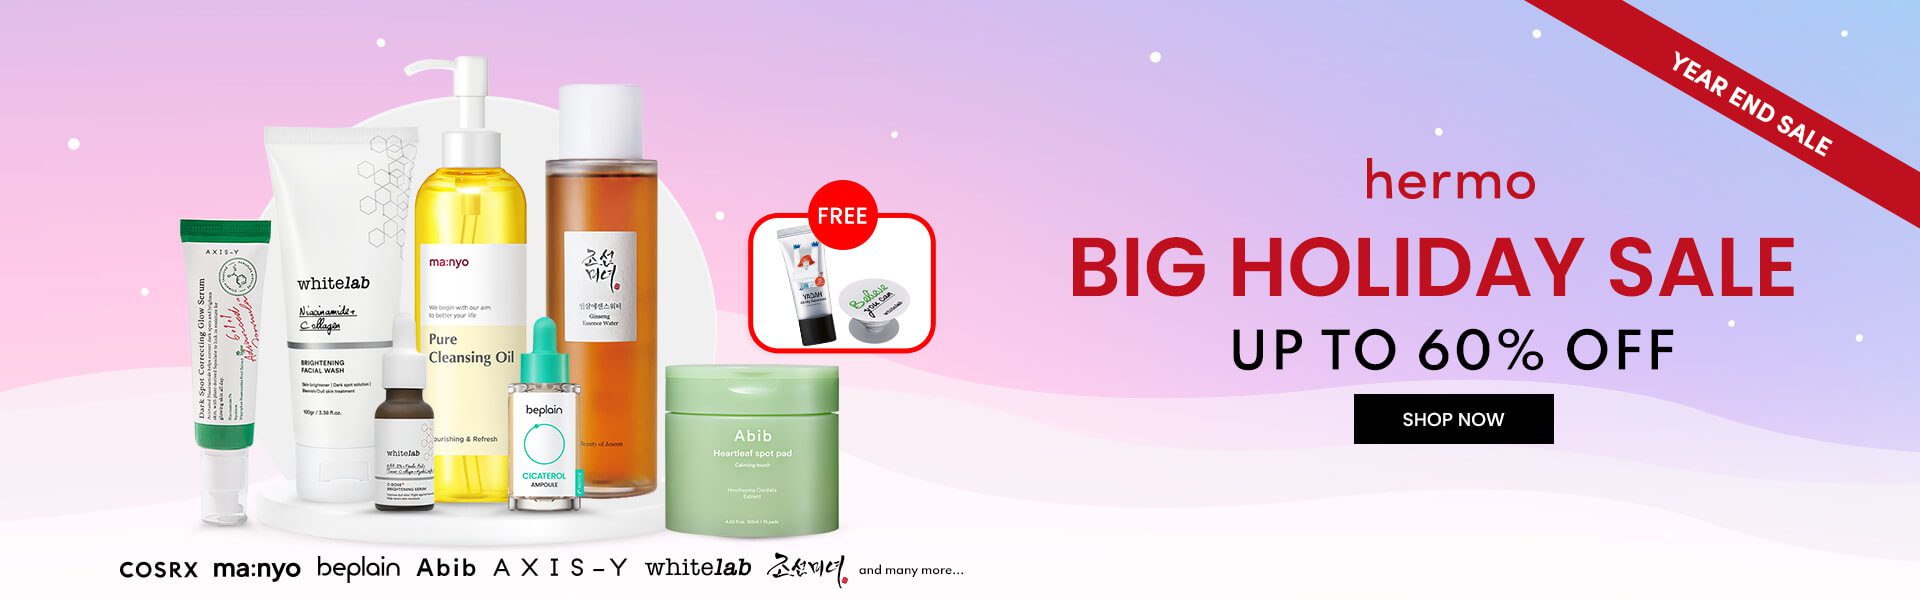 Hermo Malaysia Promotion - BUY 1 Free 1 with Extra RM 5 OFF - Freebies4u